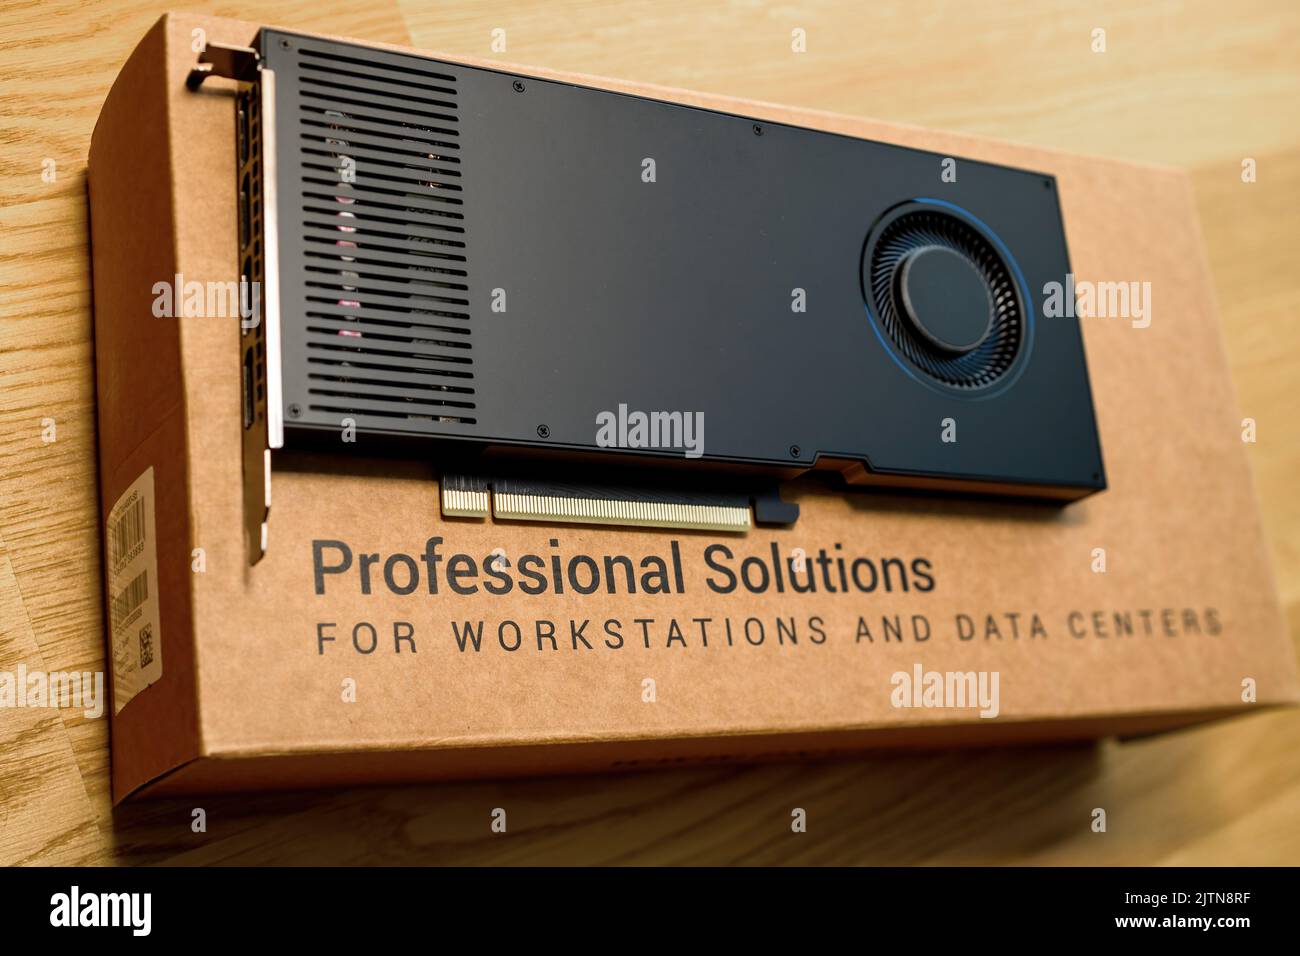 London, United Kingdom - Aug 5, 2022: Unboxing Nvidia RTX A4000 Ampere workstation professional solutions video card GPU for CAD CGI scientific machine learning - most powerful single-slot GPU Stock Photo